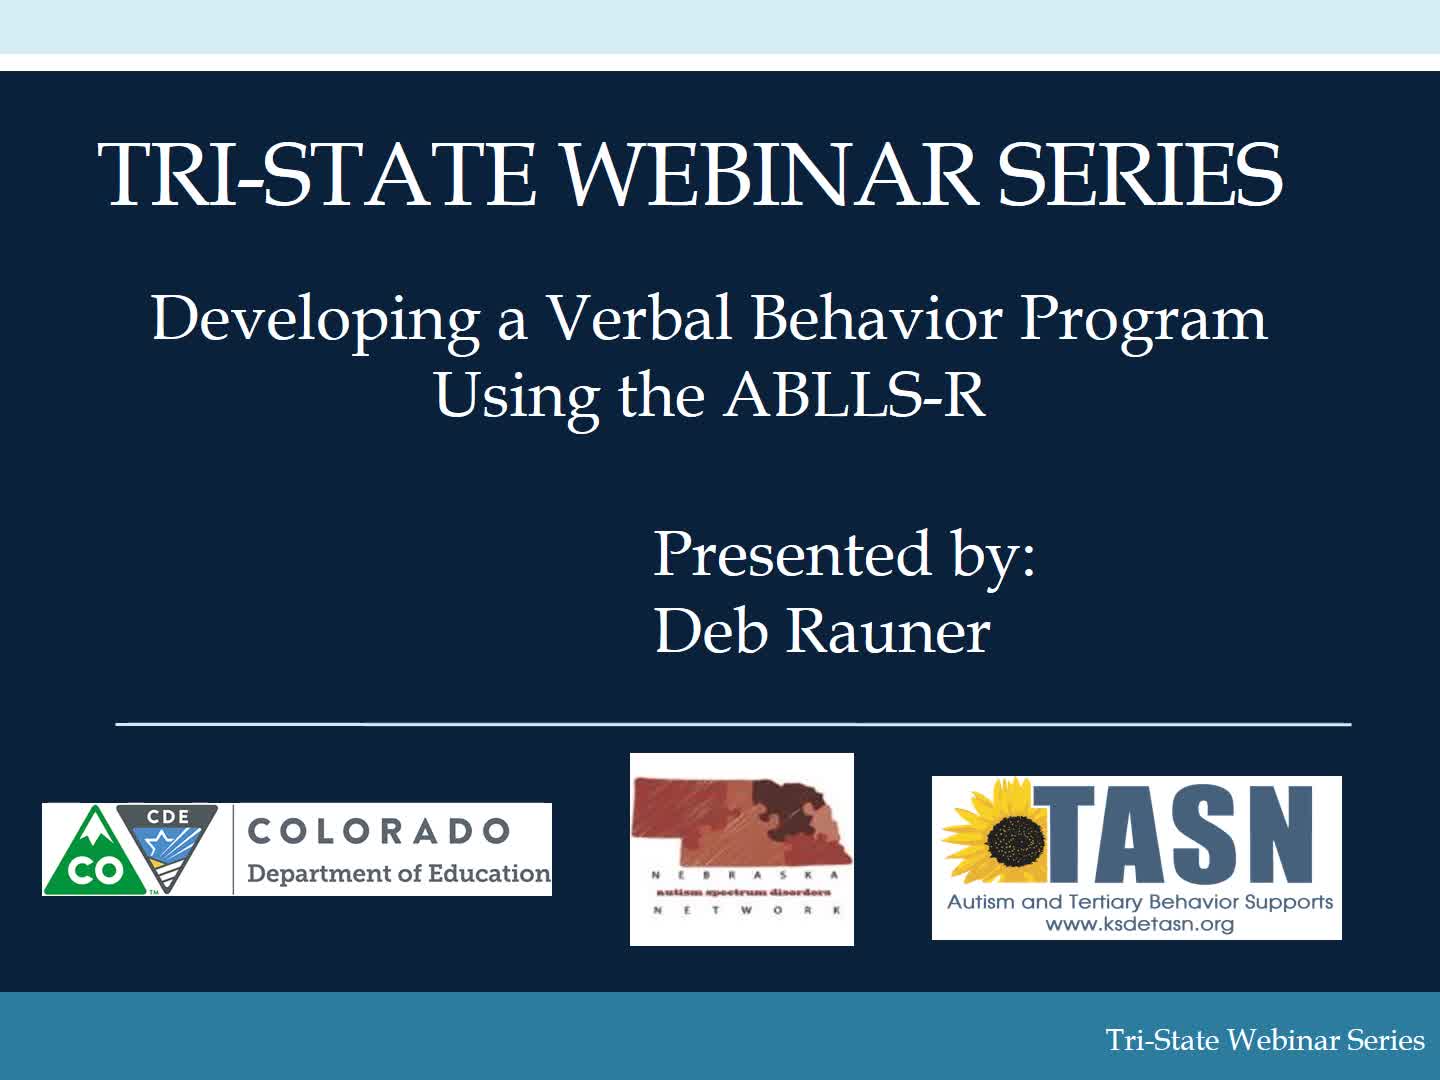 Developing a Verbal Behavior Program with the ABLLS-R